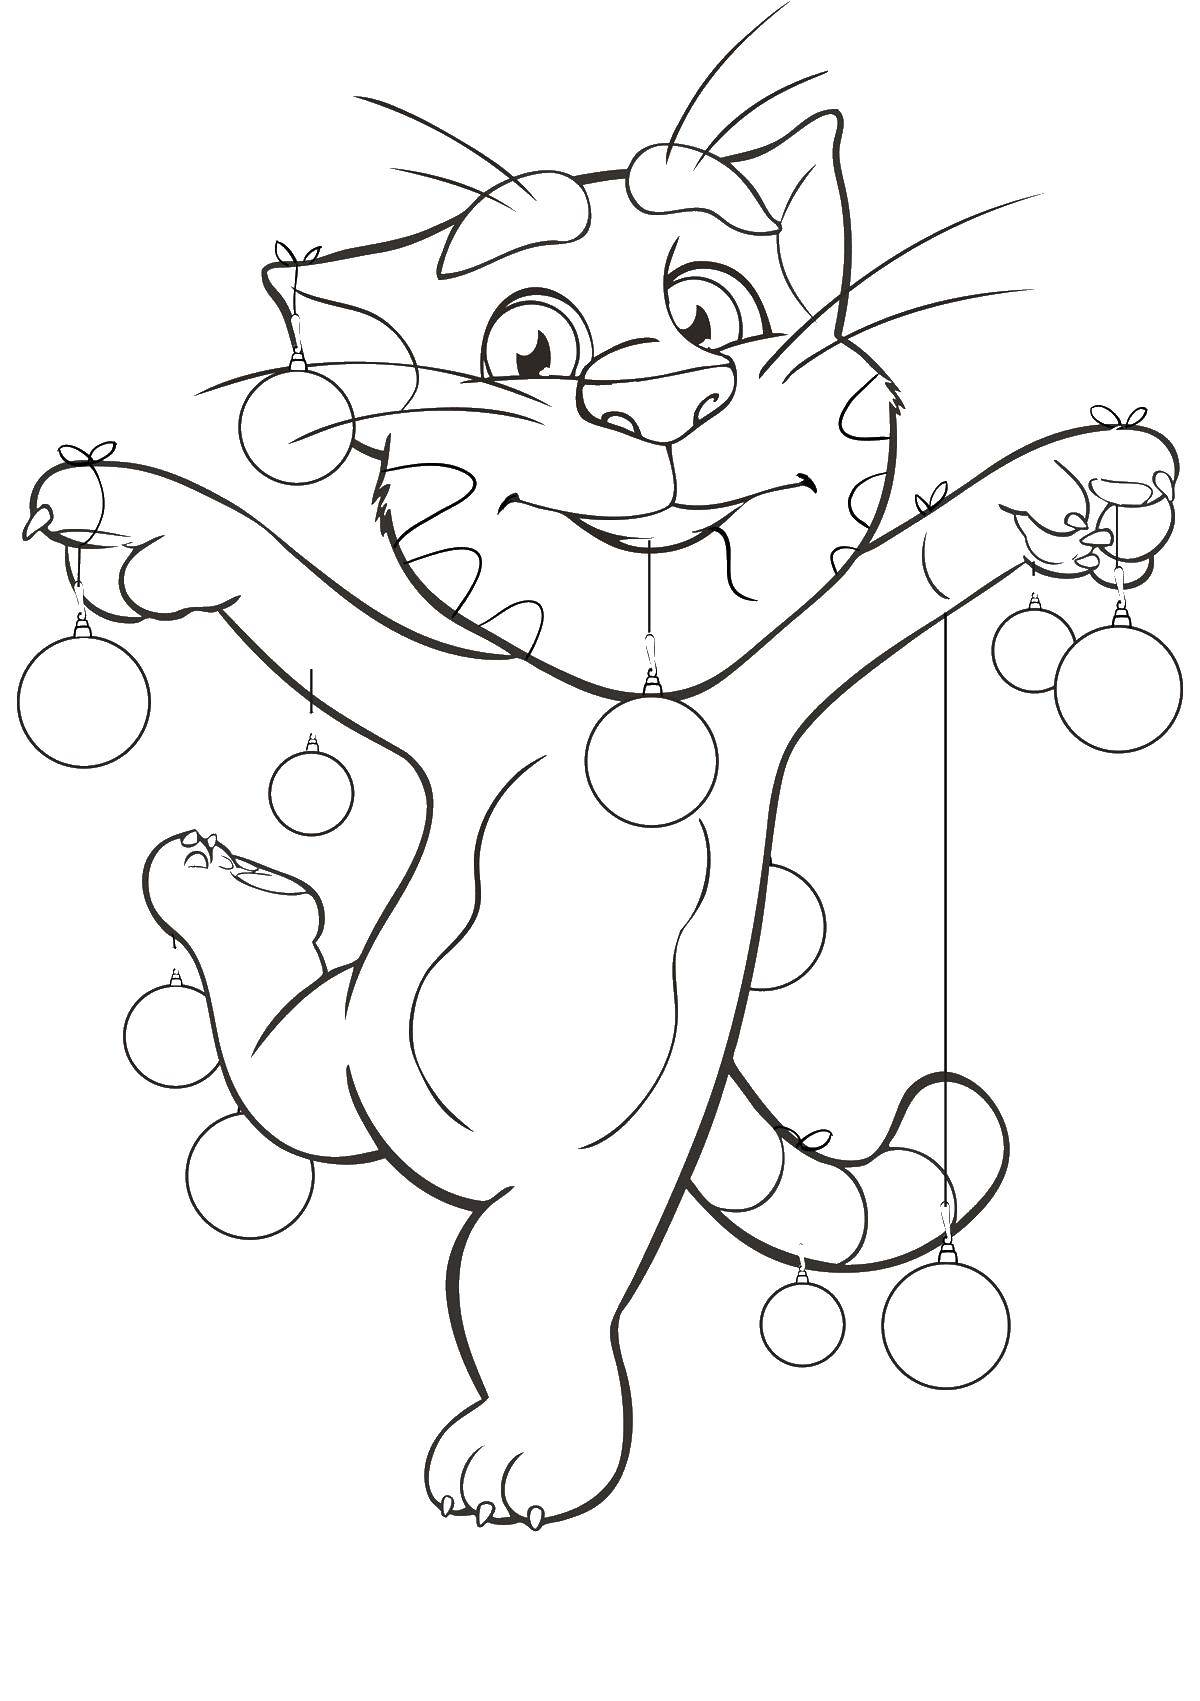 Coloring Cat in Christmas decorations. Category coloring. Tags:  games, cat, Tom.